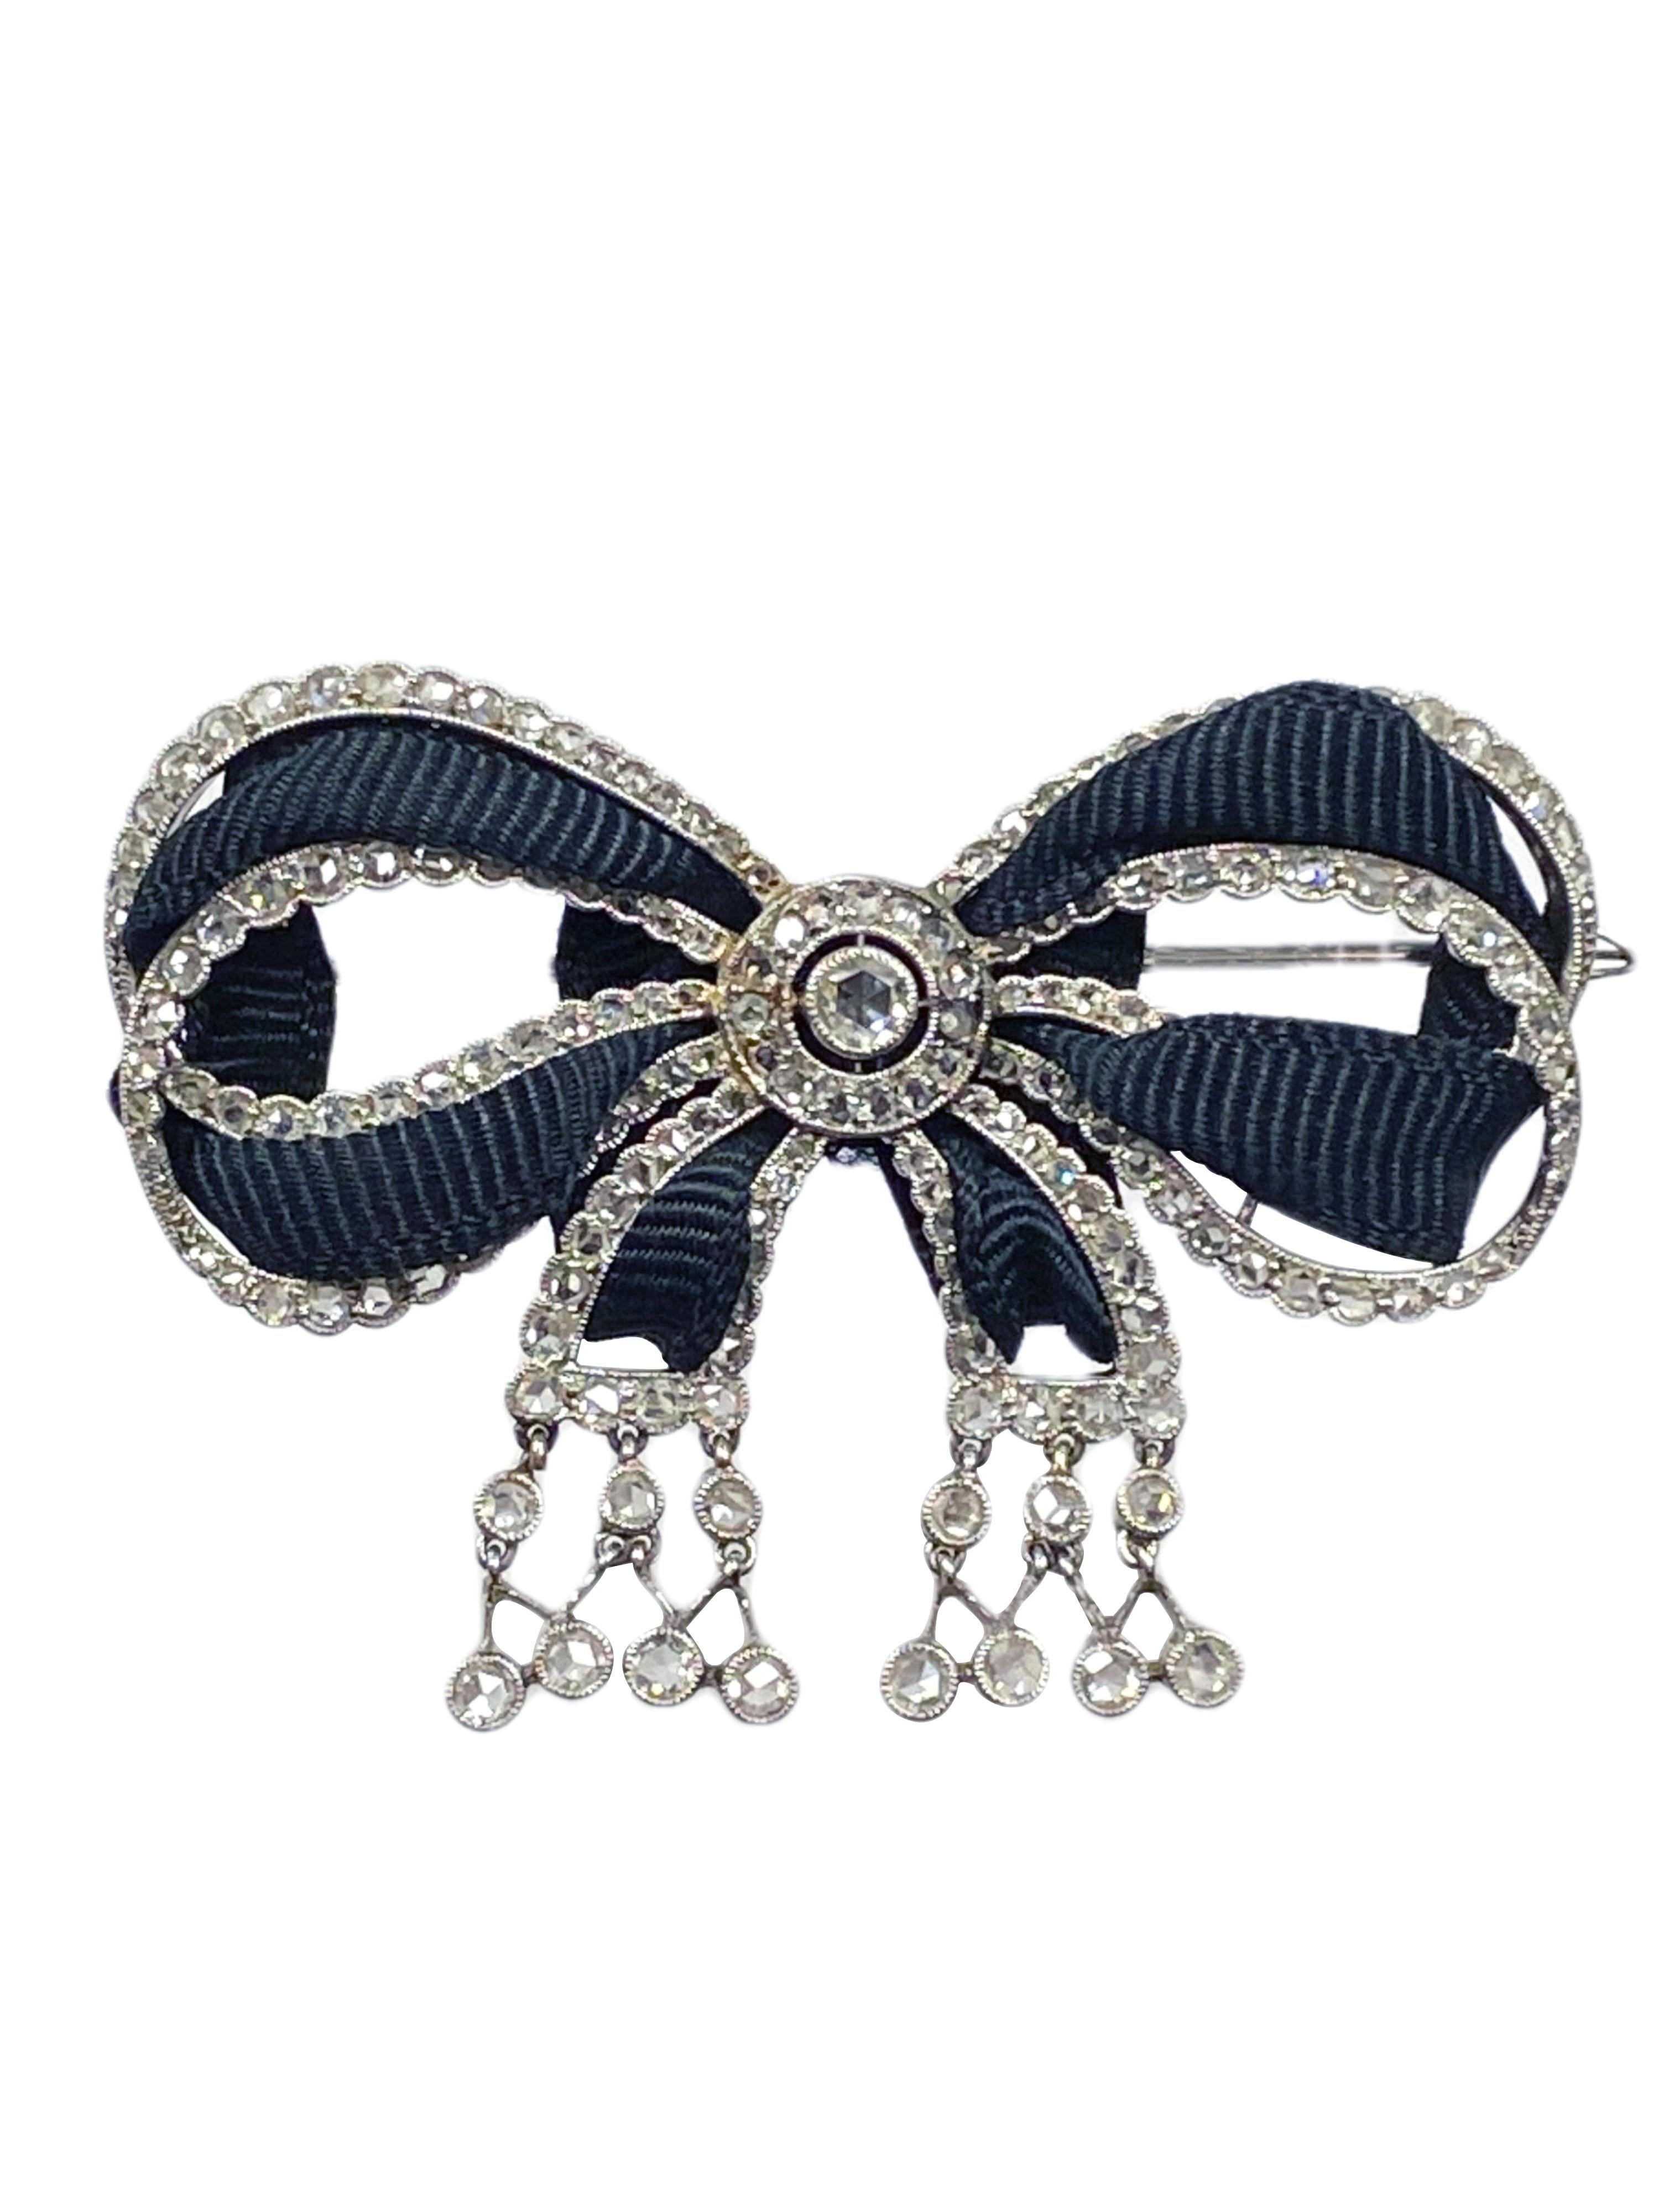 Circa 1910 Cartier Paris Platinum Bow Brooch in the Edwardian Belle Epoque style, measuring 2 1/4 inches in length X 1 1/2 inches. Fine Milgrain work and set throughout with Rose cut Diamonds totaling approximately 3 Carats. Further enhanced with